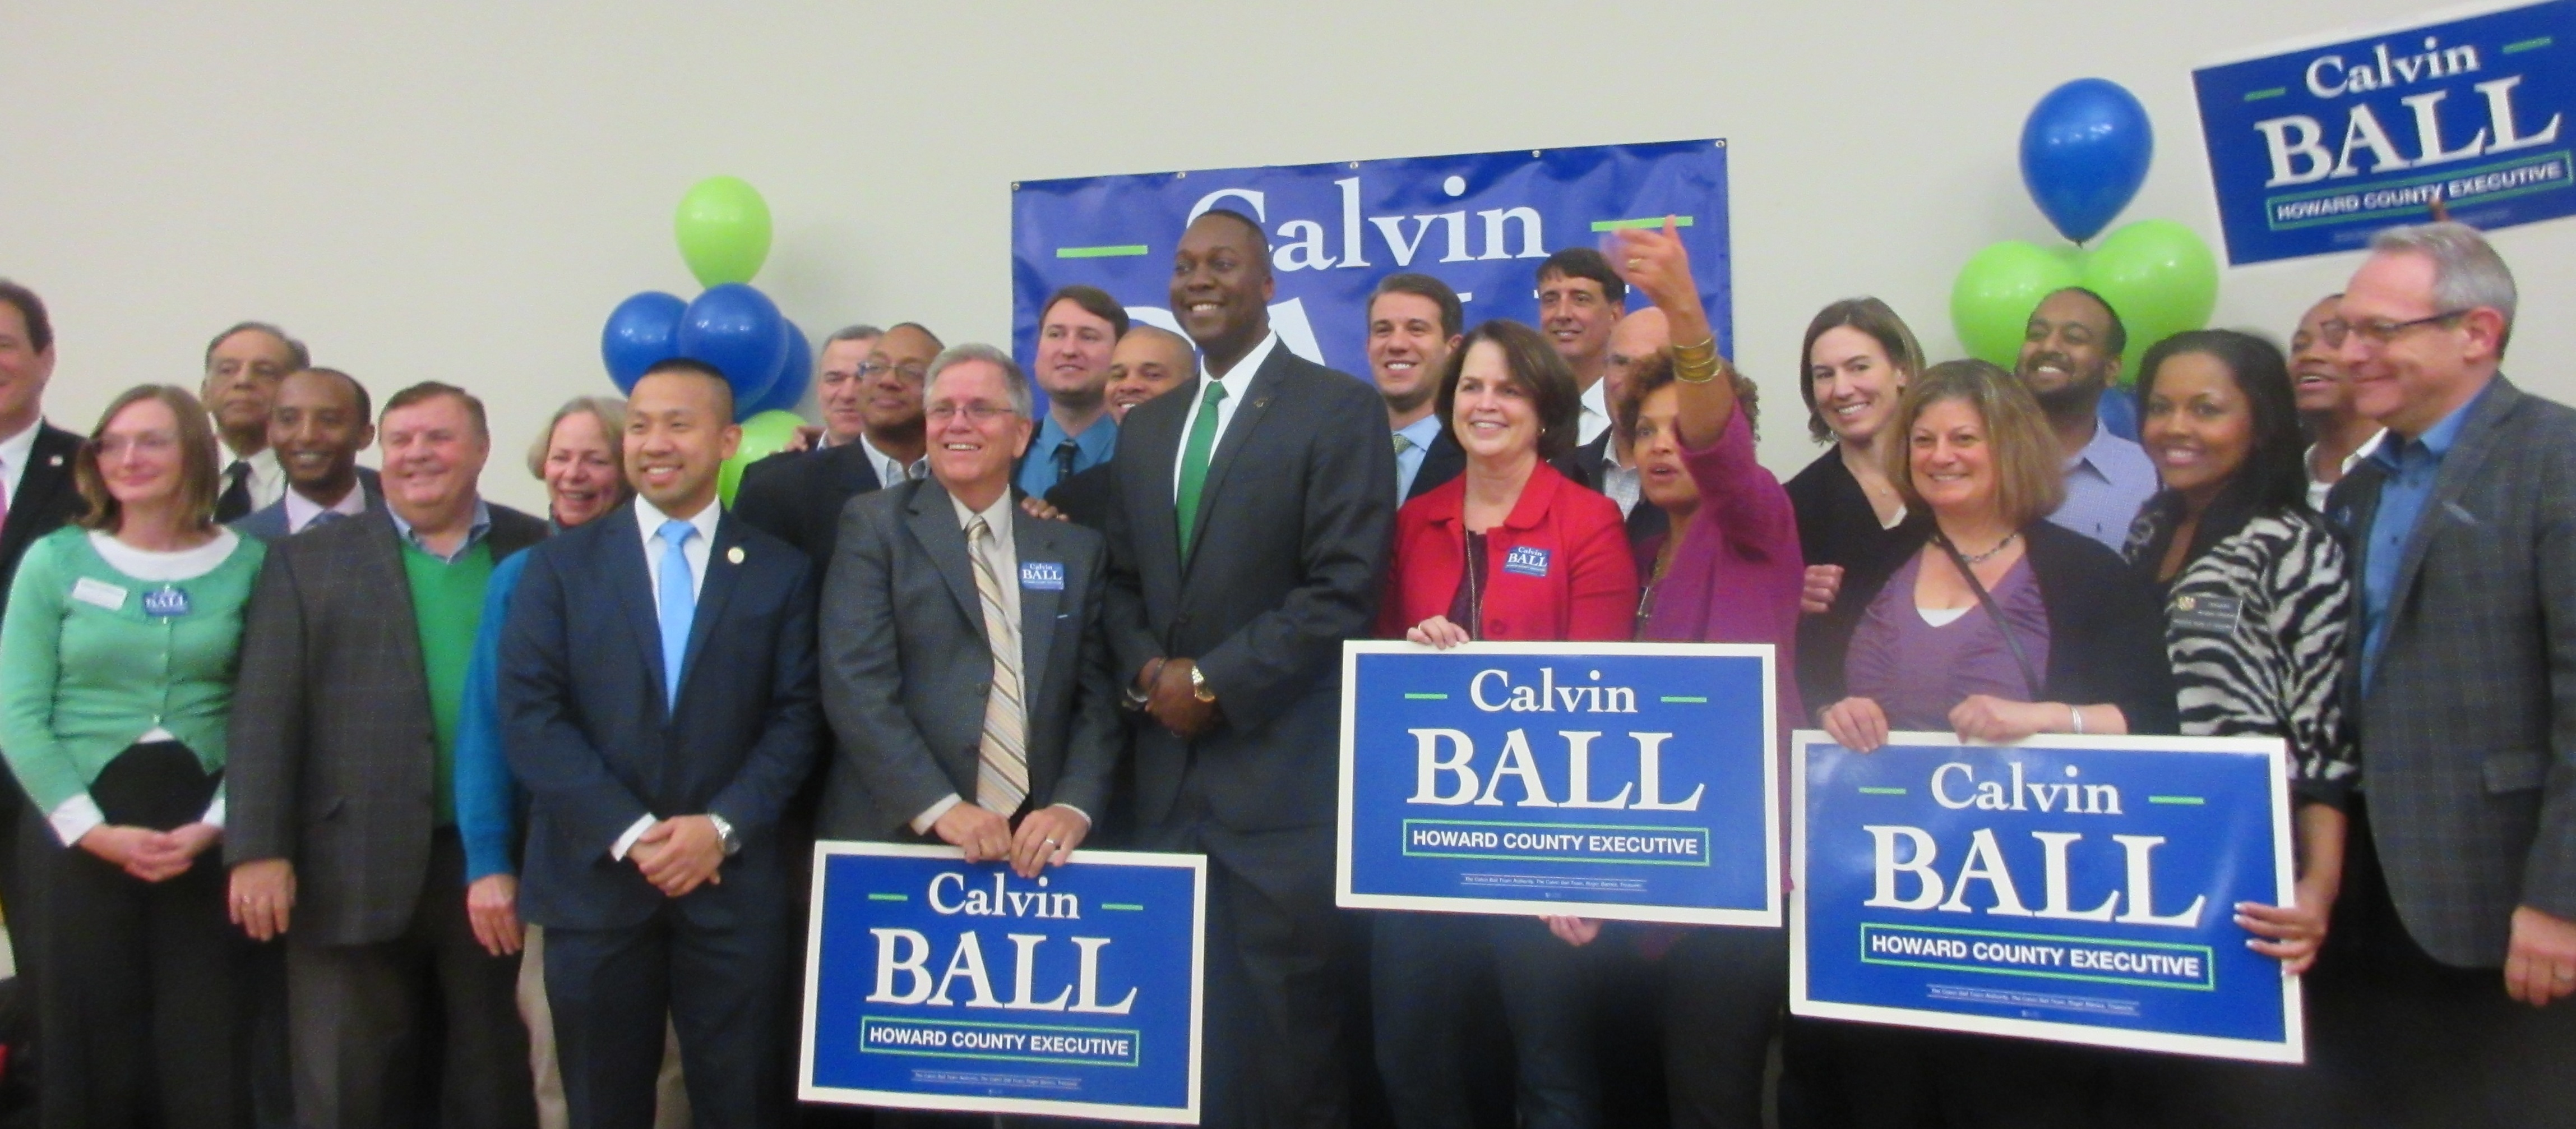 Democrat Ball promises a positive campaign to unseat Howard County Executive Kittleman